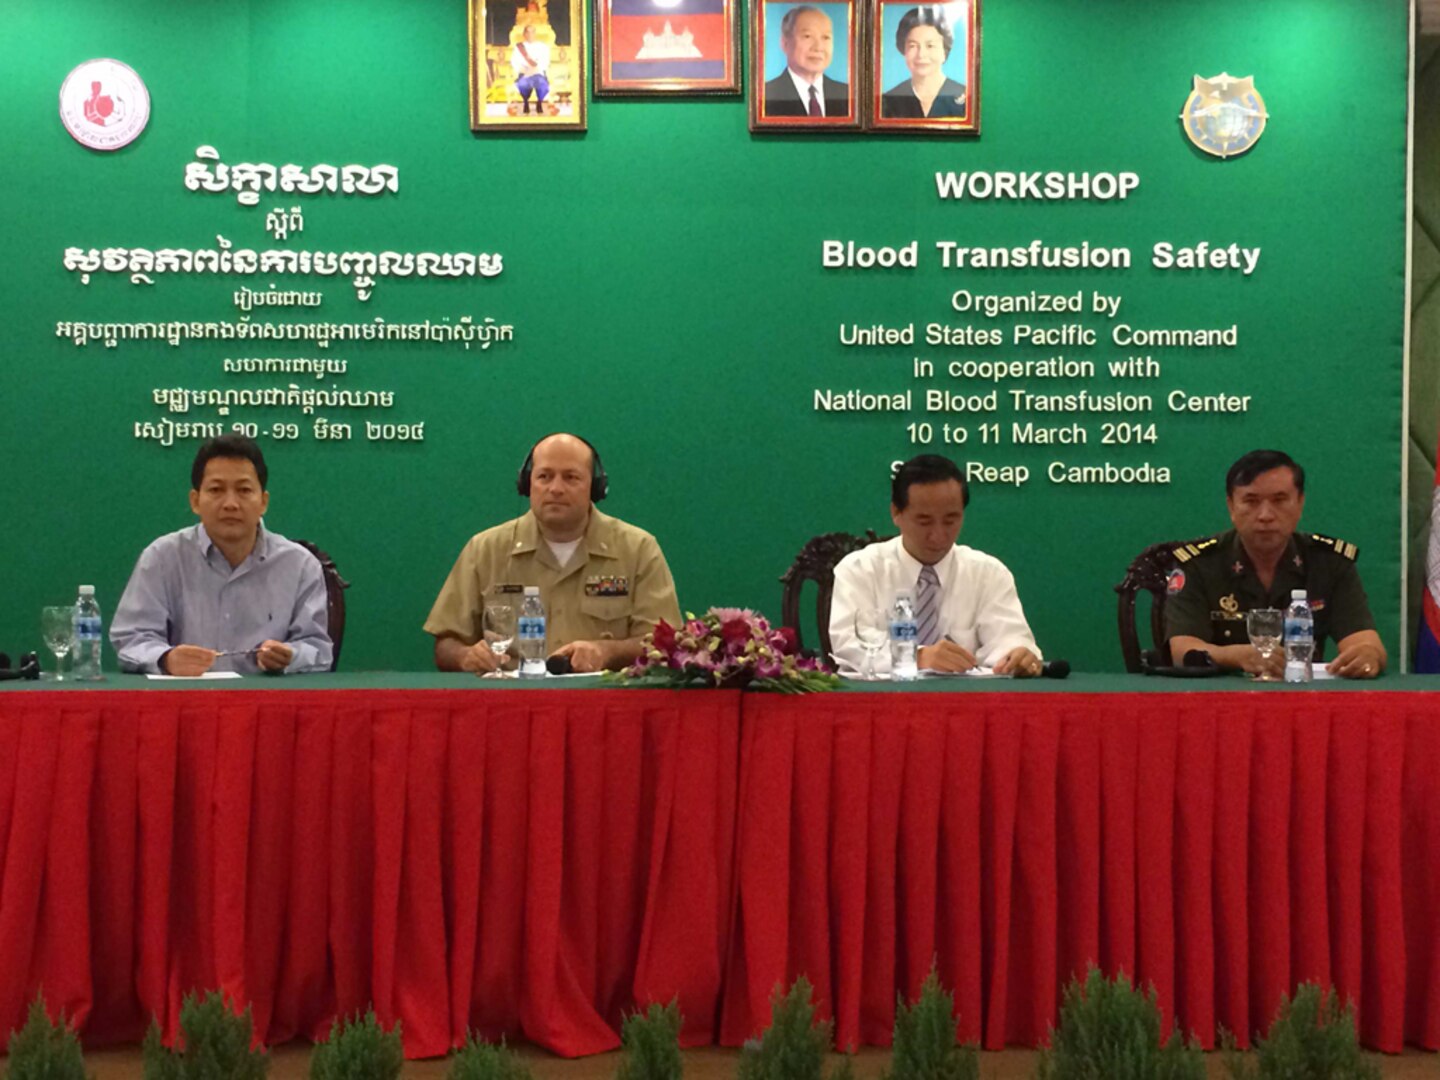 In this file photo, the U.S. military works with Asia-Pacific partner nations to improve Humanitarian Assistance and Disaster Response capacity by helping ensure a reliable and interoperable blood supply throughout the region. Since 2009, the U.S. Pacific Command (PACOM) Blood Safety Program has worked with civilian and military agencies of partner nations such as Cambodia, Laos, and Vietnam to ensure an adequate response in the event of a disaster. 